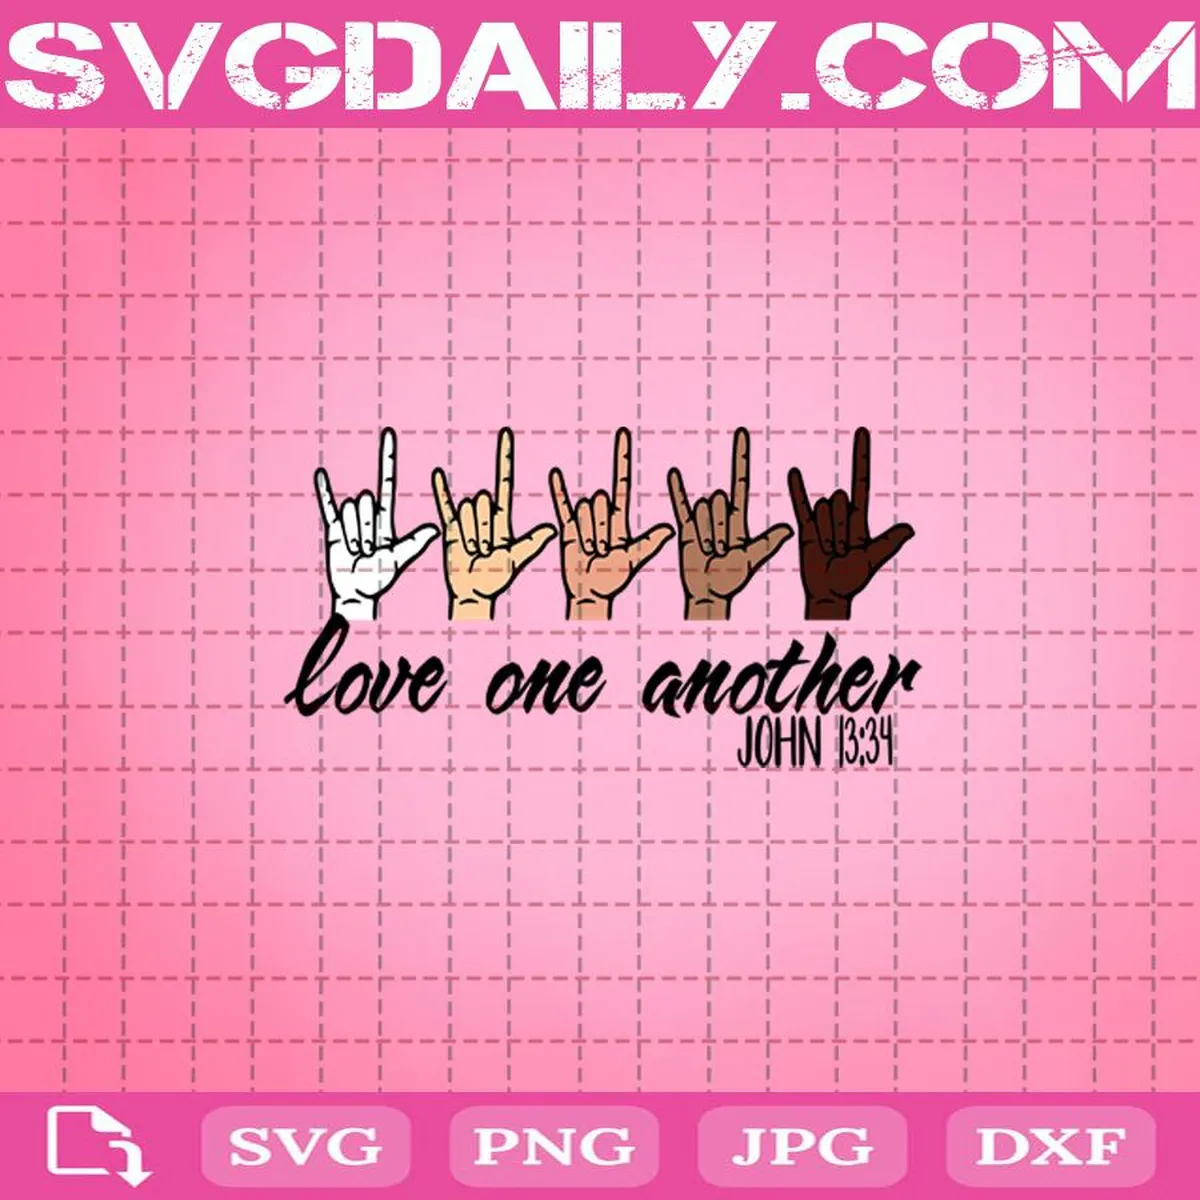 Love One Another John 1334 Black The Matter Svg, Police Svg, Love One Another Svg, Black Lives Matter Svg, American Sign Language Svg